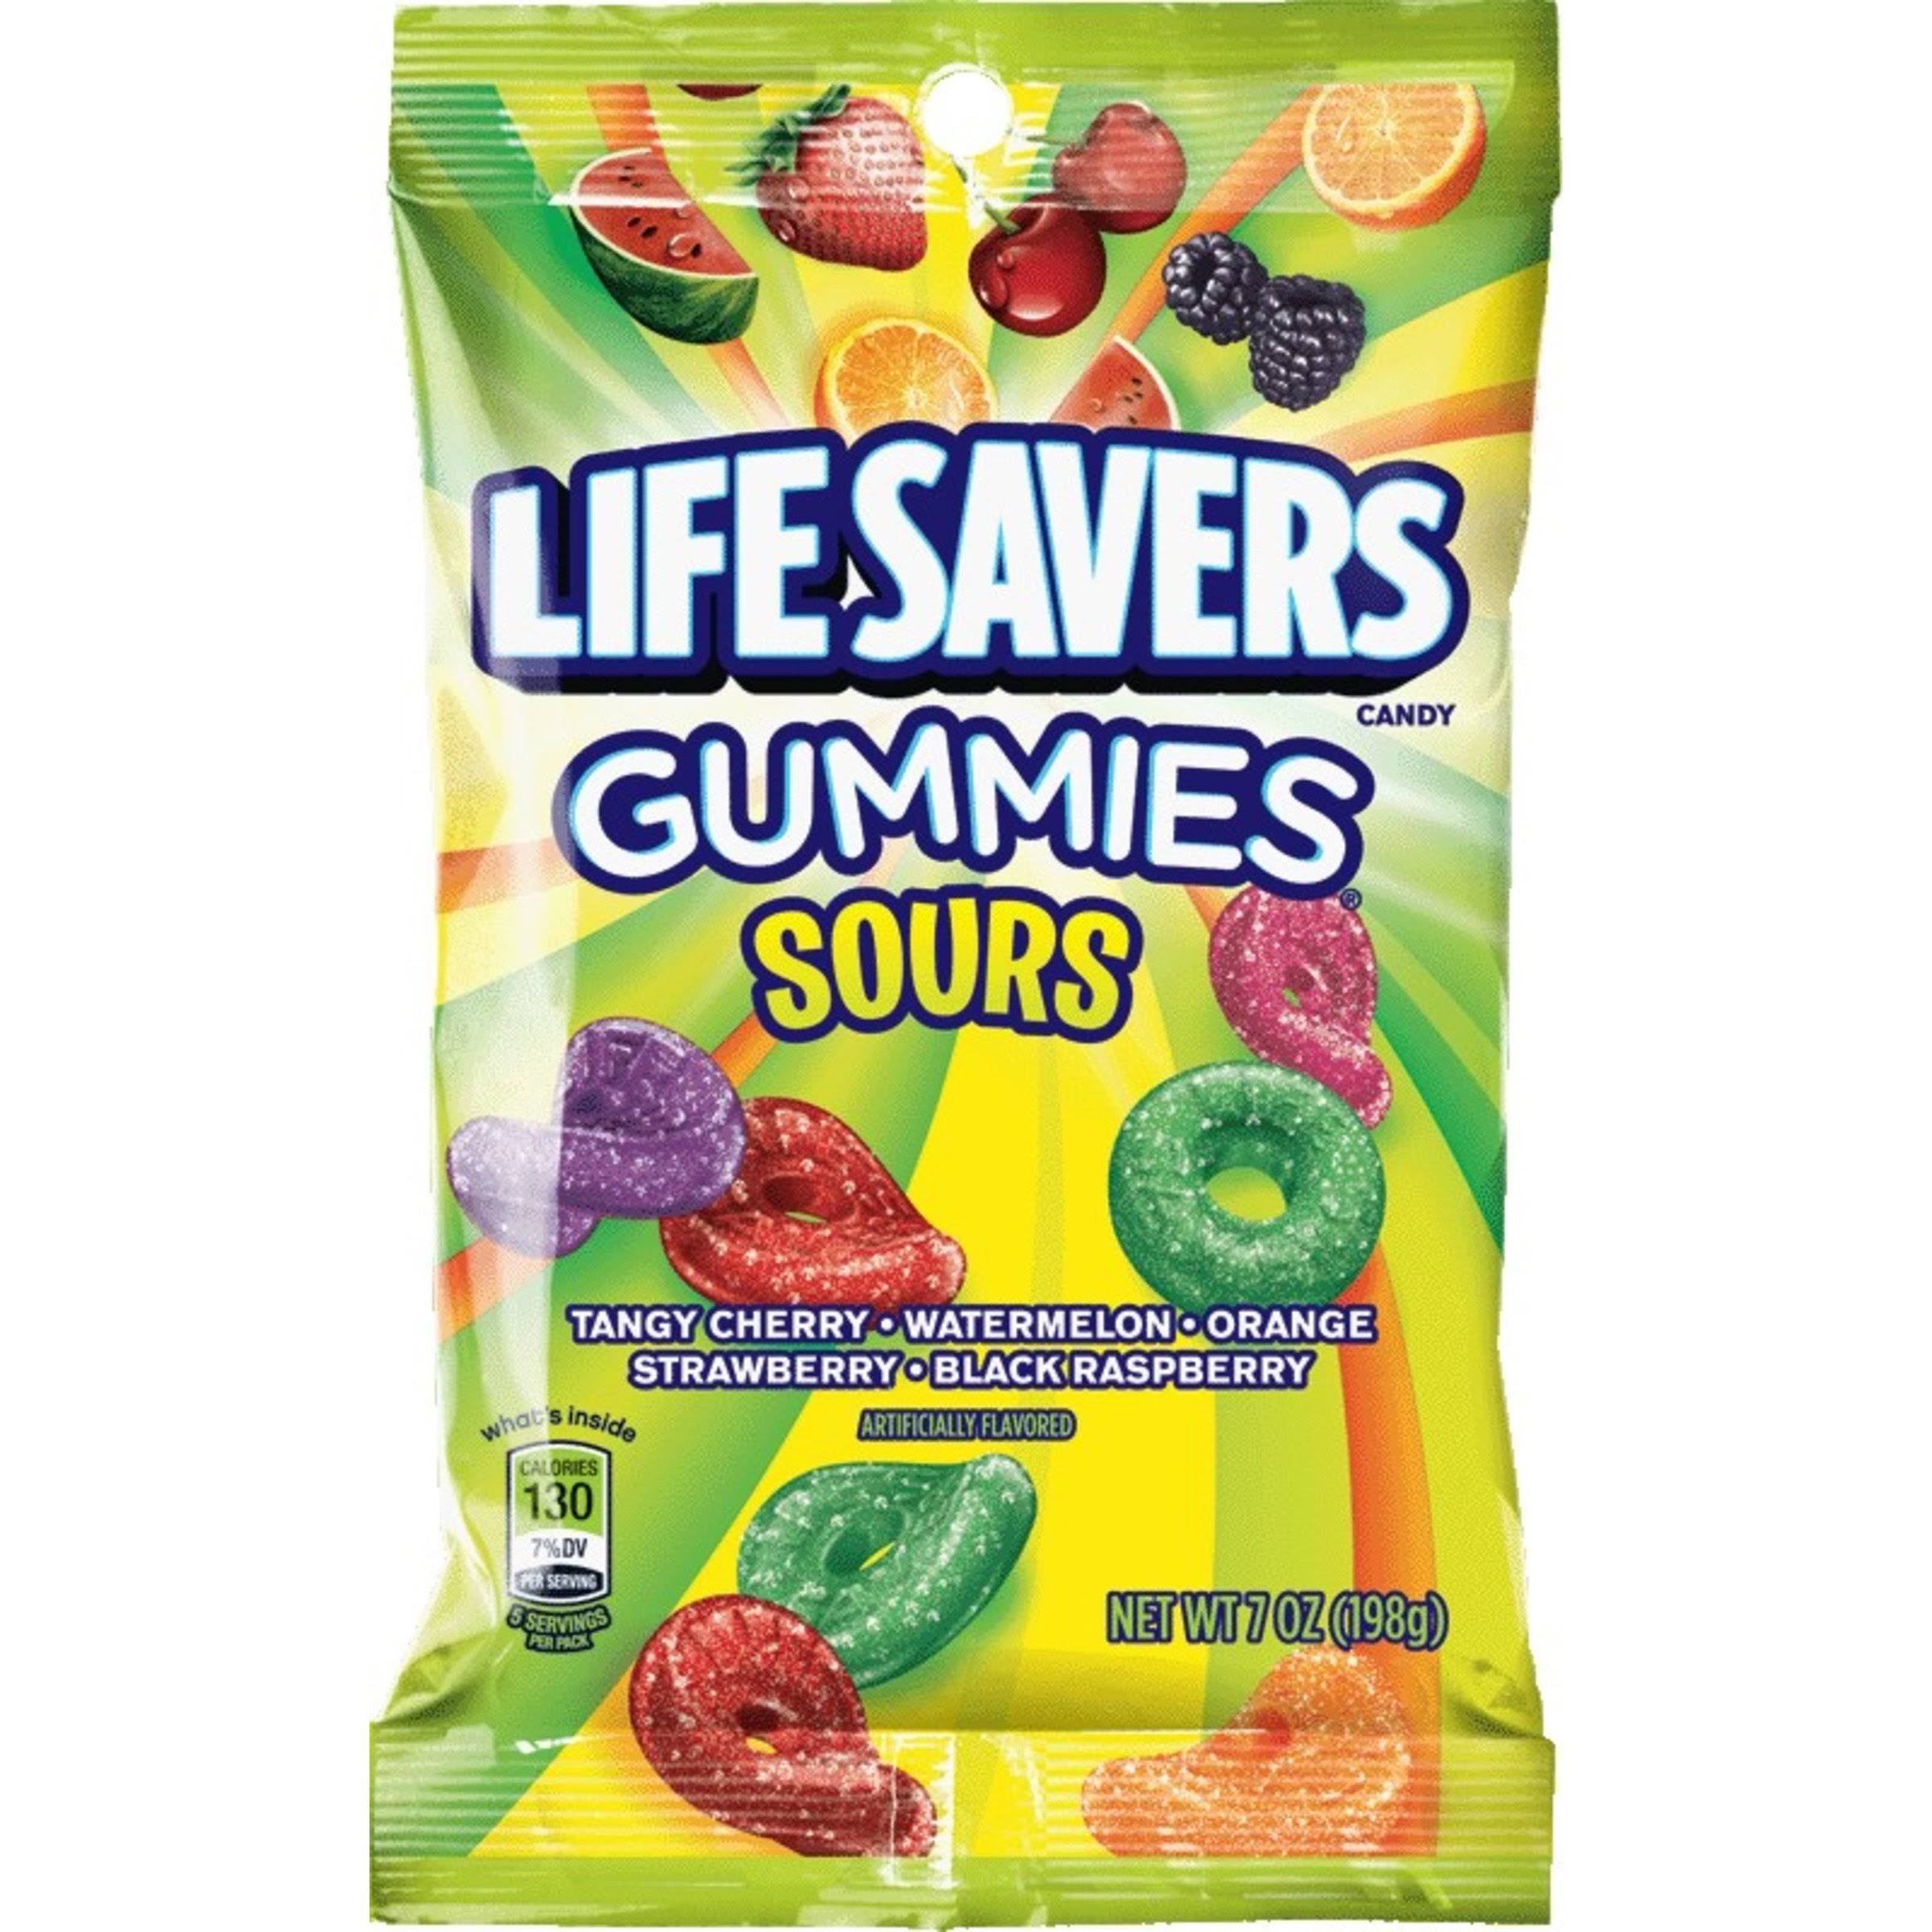 Life Savers Gummies Candy - Sours, 198g